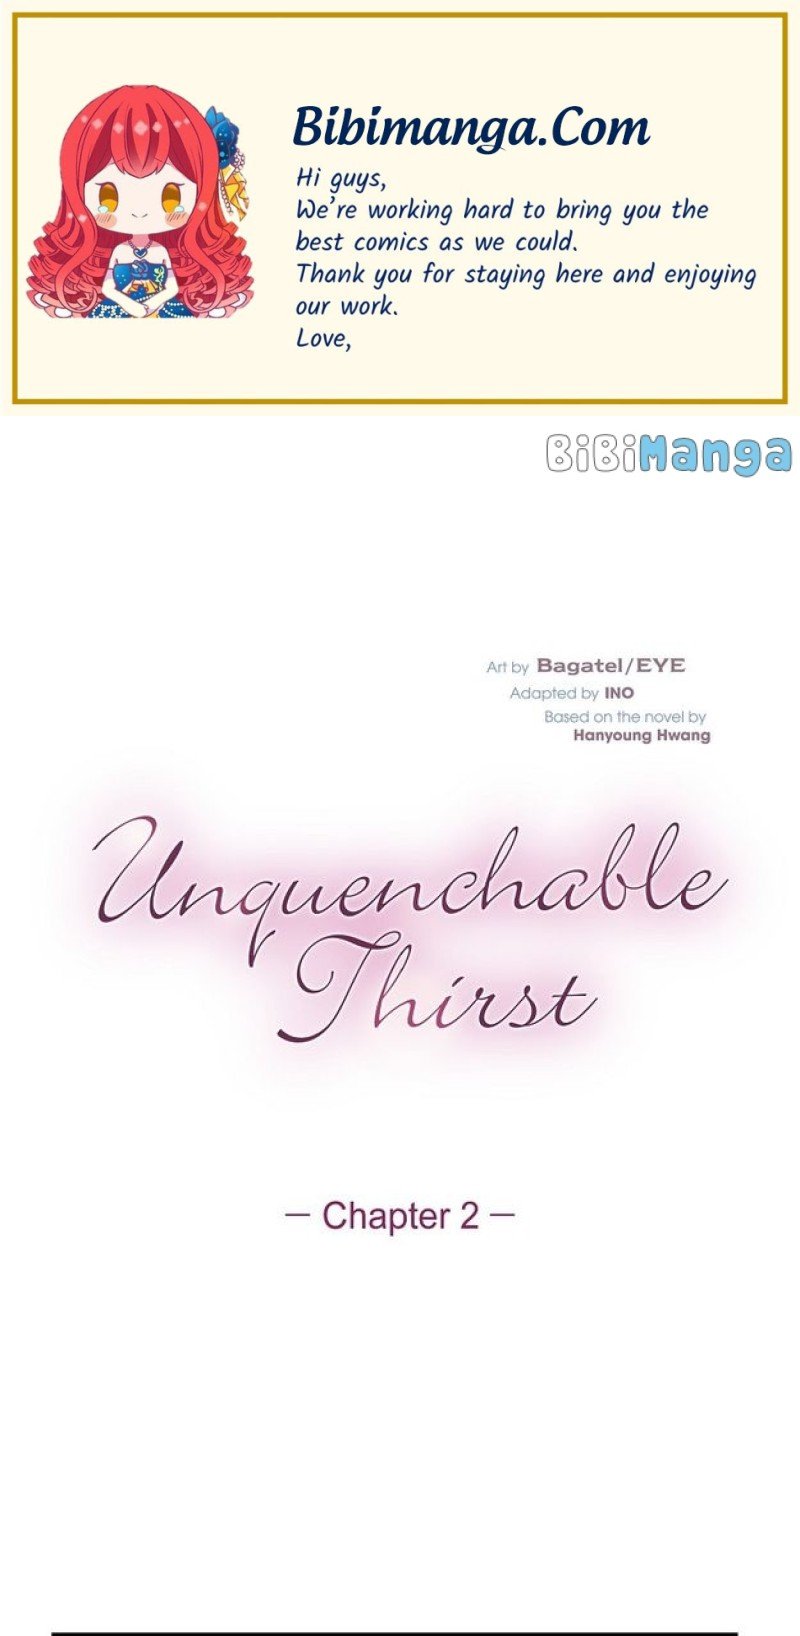 Unquenchable Thirst chapter 2